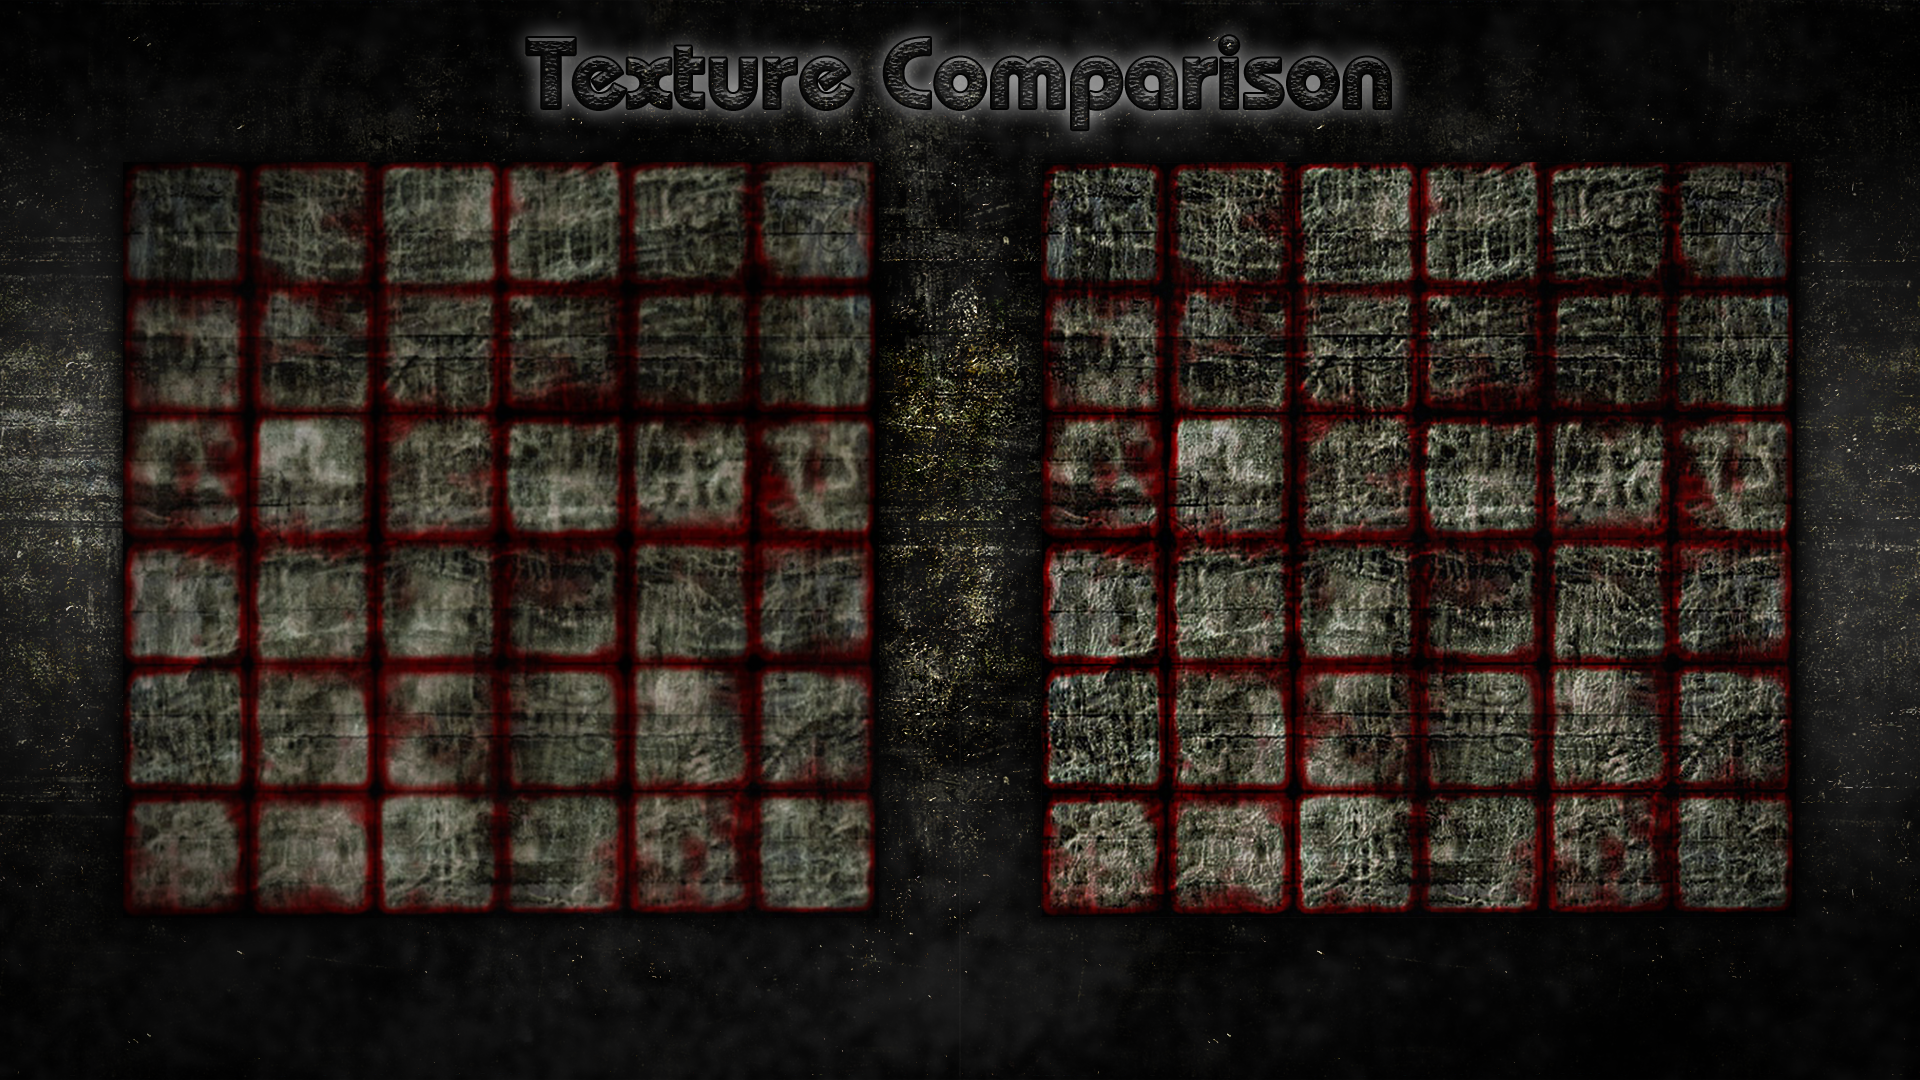 PC / Computer - SCP: Containment Breach - SCP-049 - The Textures Resource